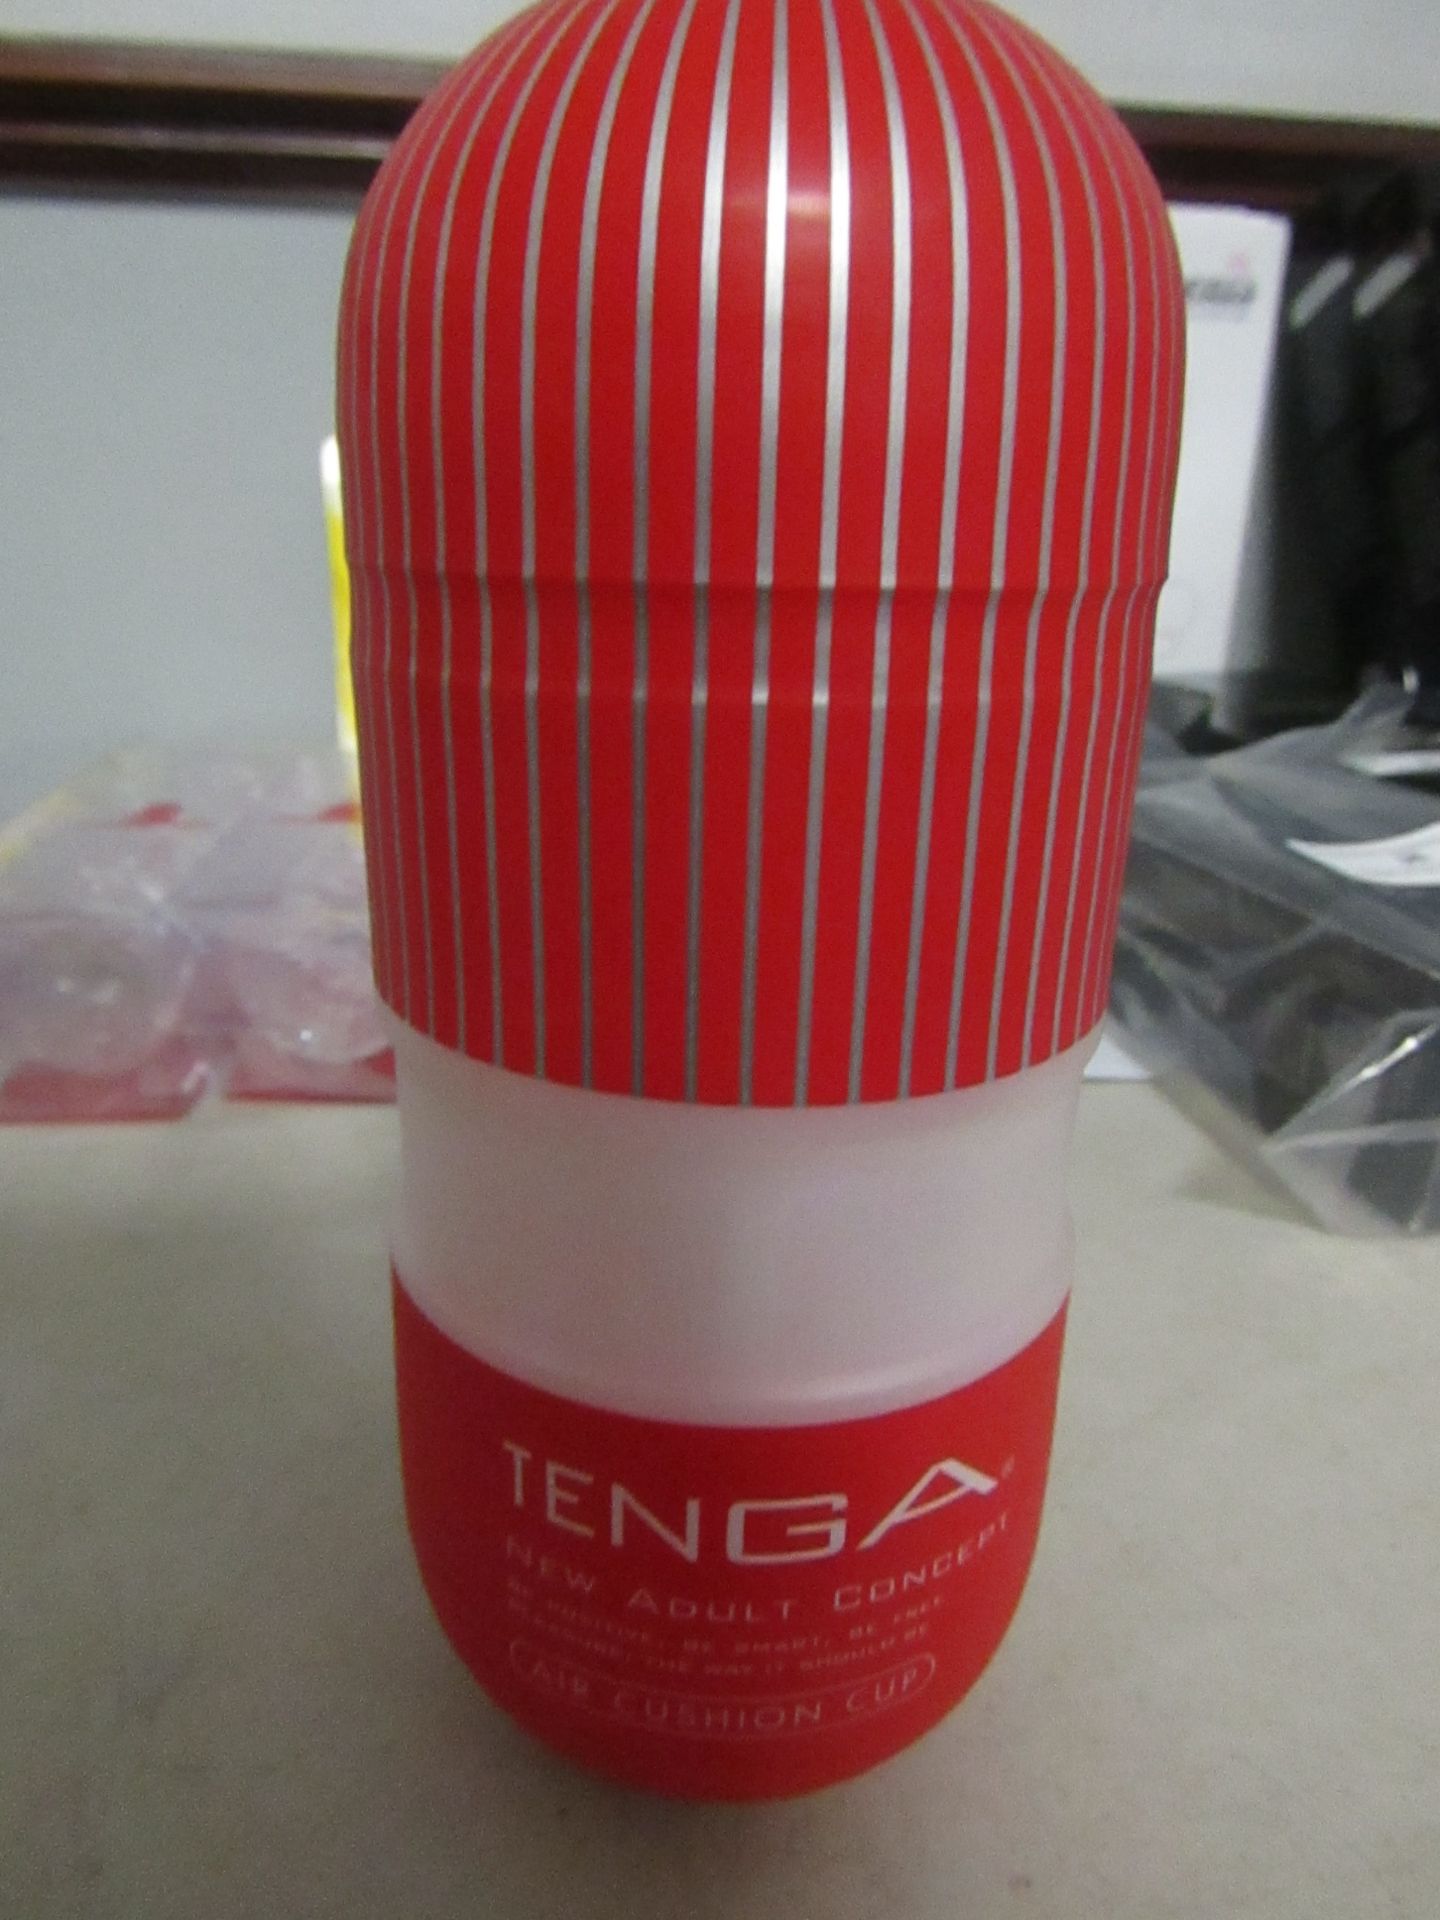 Tenga Air cushion Cup Sex toy, new and still sealed